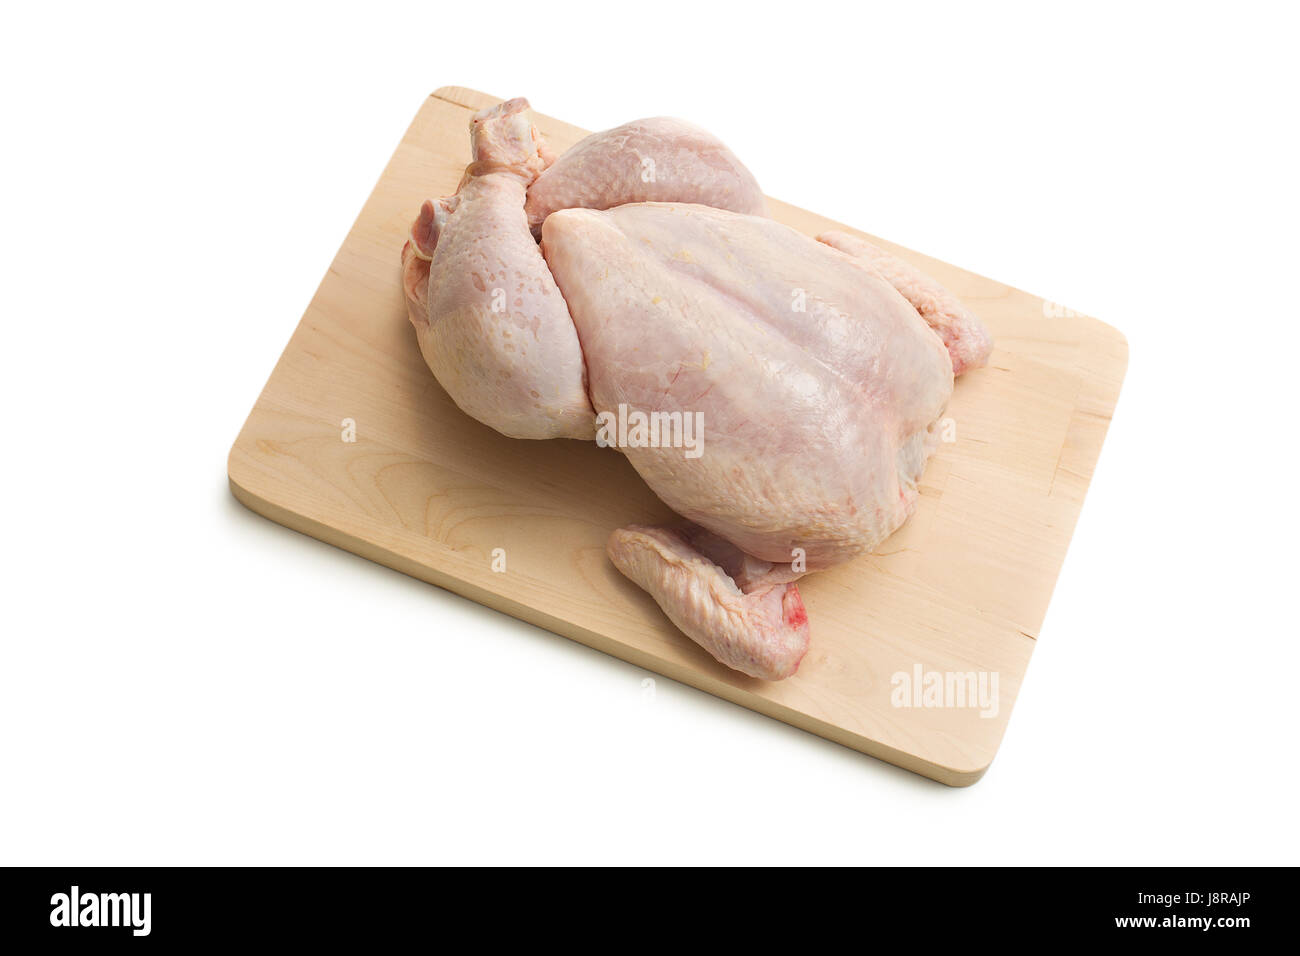 boil, cooks, boiling, cooking, raw, chicken, uncooked, grill, radiator grille, Stock Photo